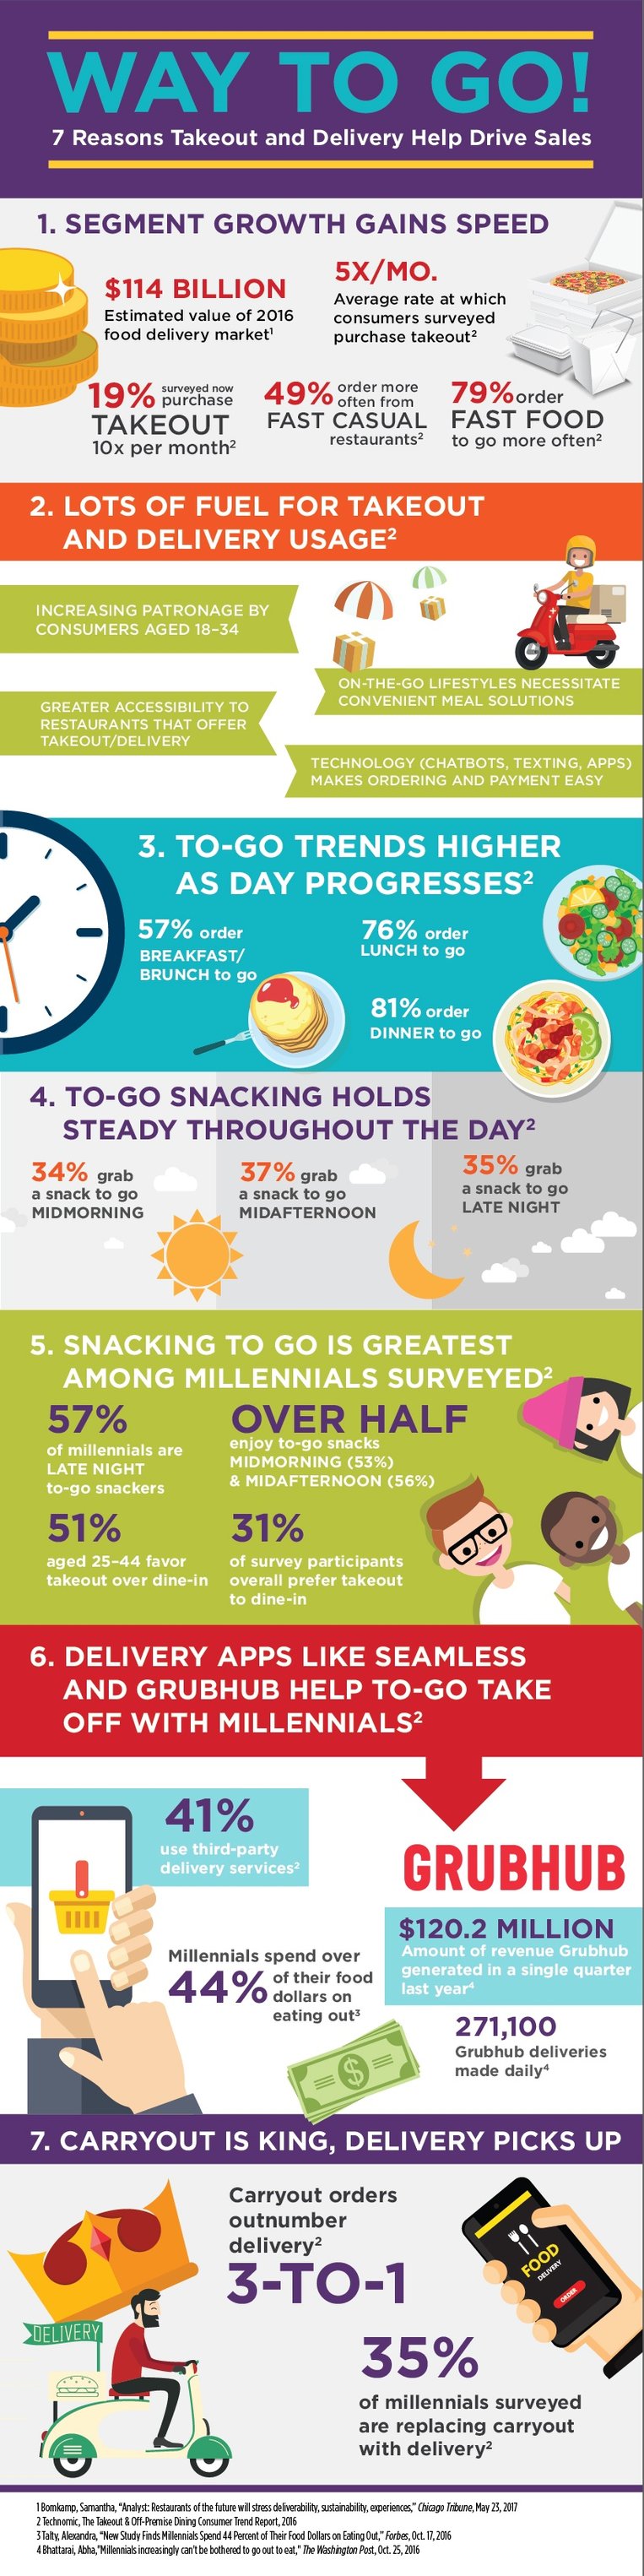 KMO170009 Lets Chat Snacks Infographic R04-01-1.jpg